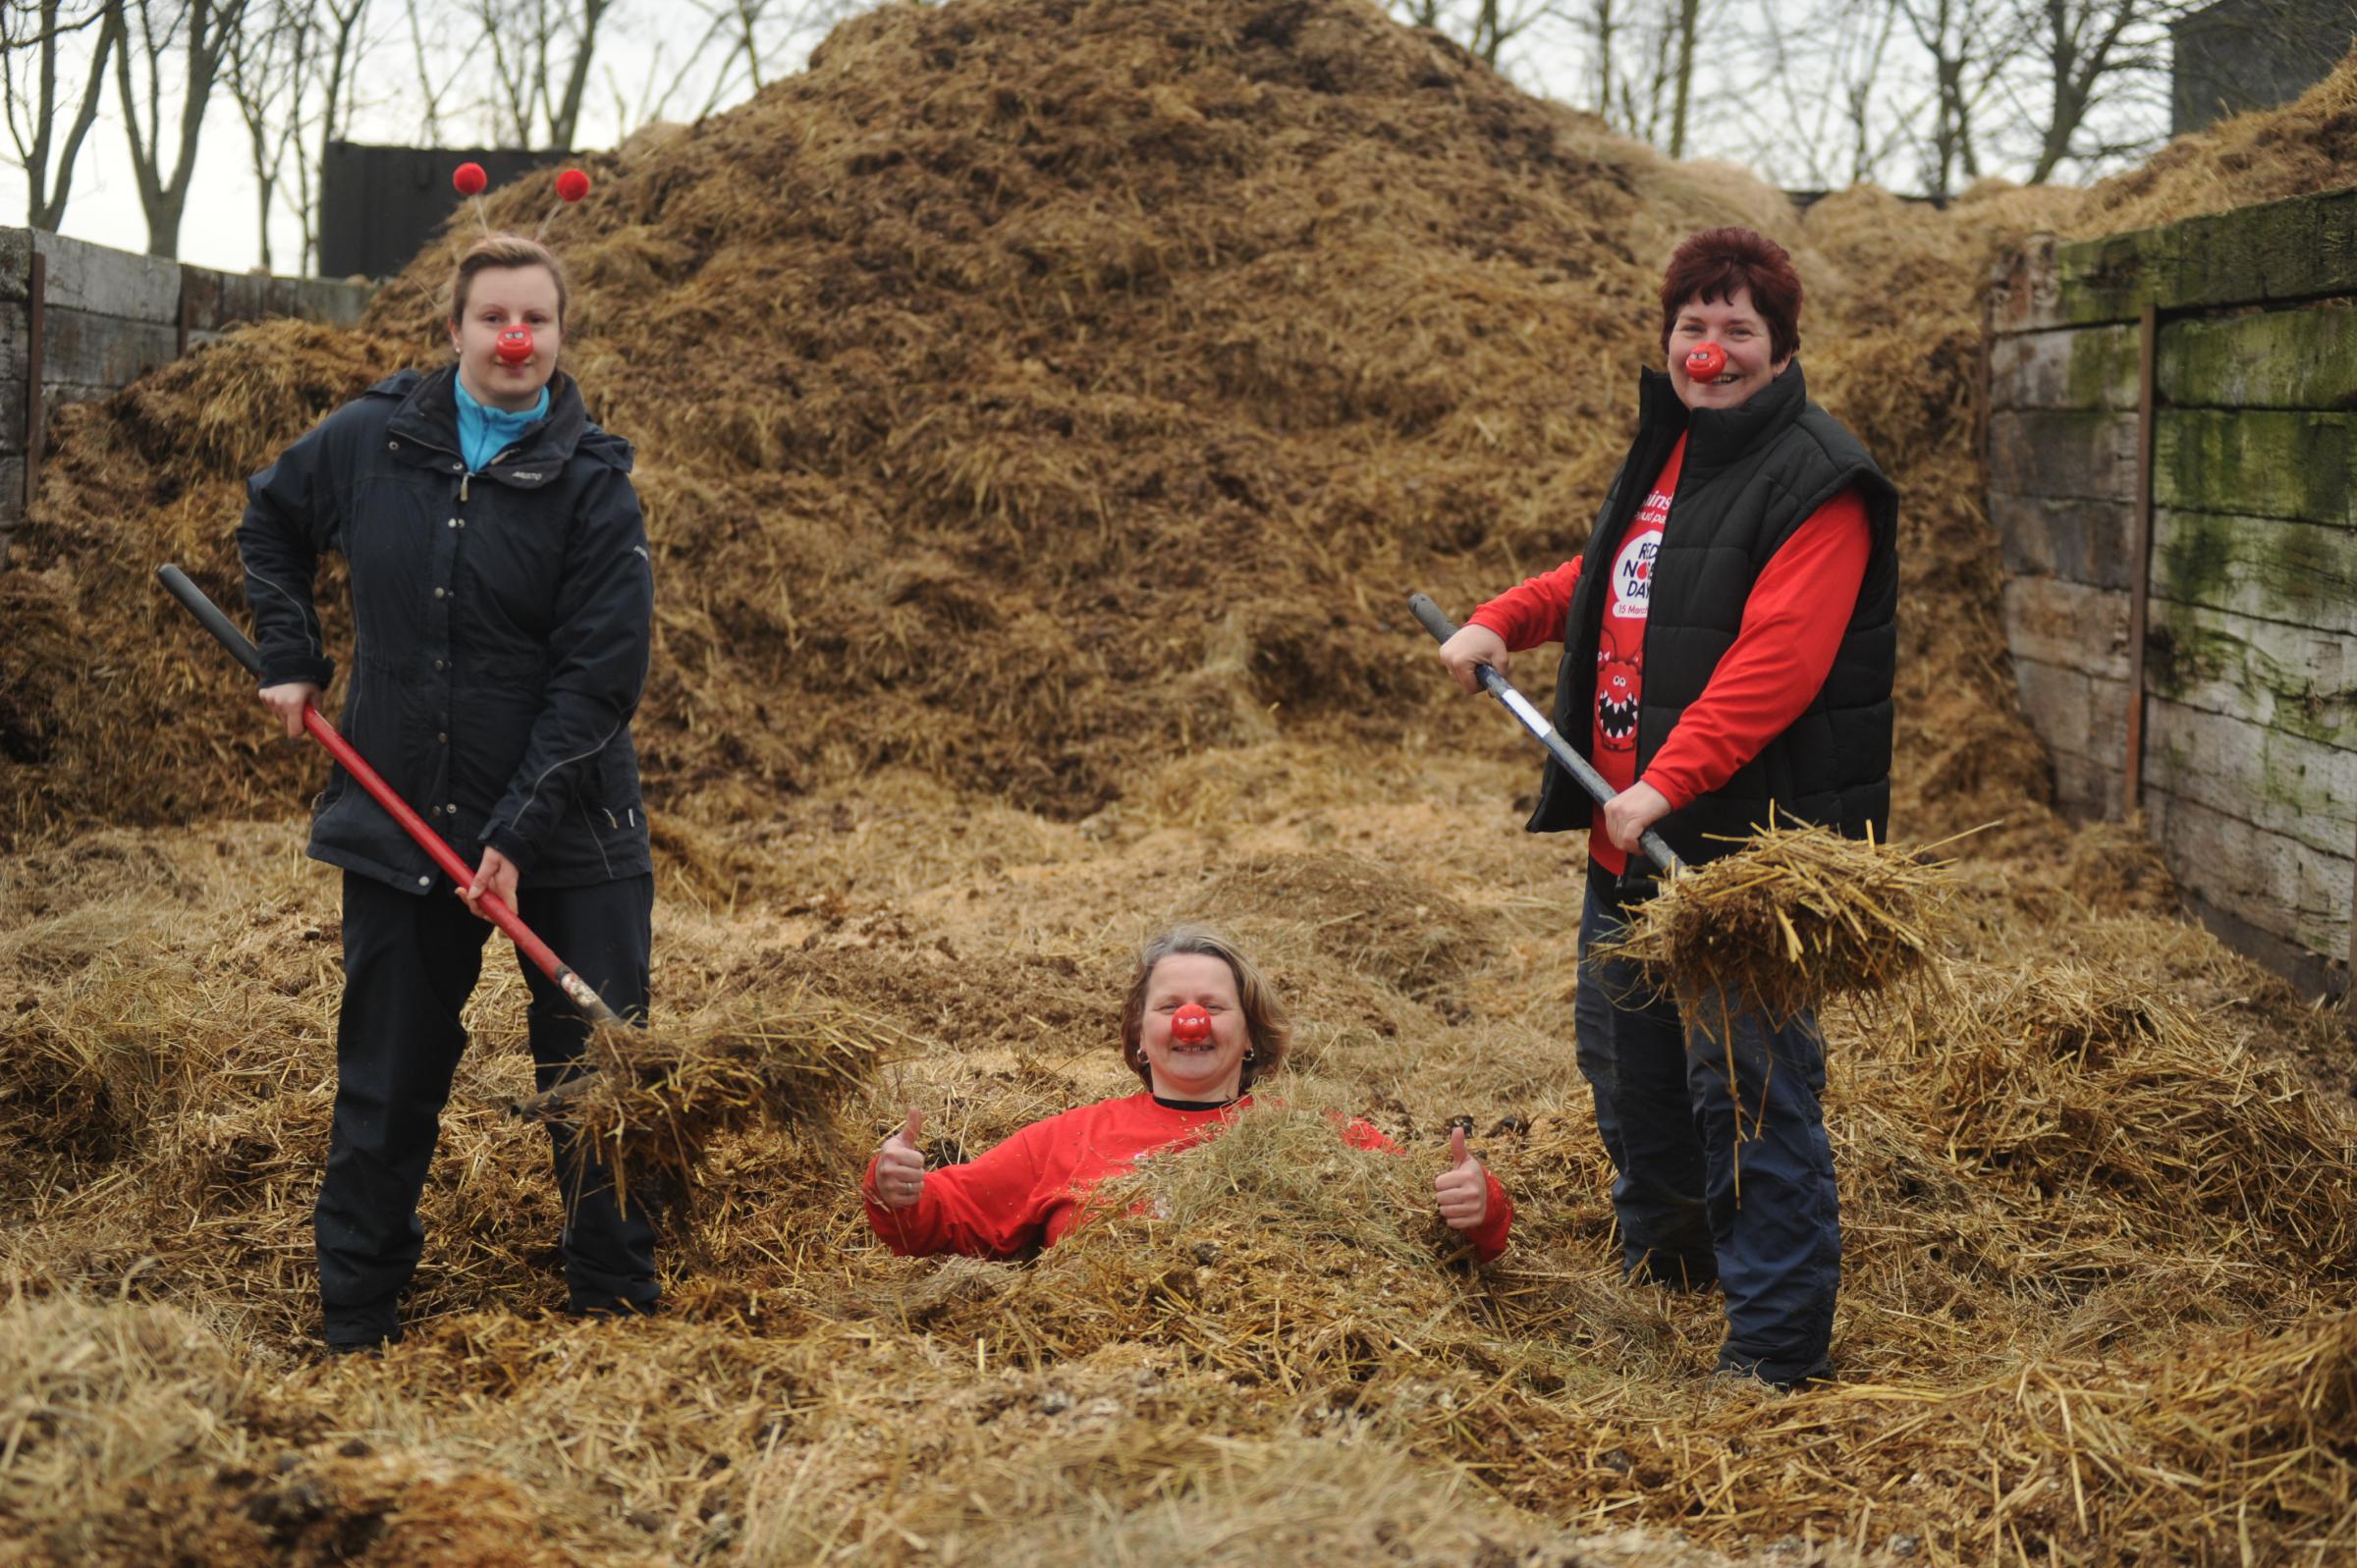 Red noses blocking the smell - Lisa Hawkins raised funds by sitting in horse manure at Wickfords Dollymans Farm in 2012